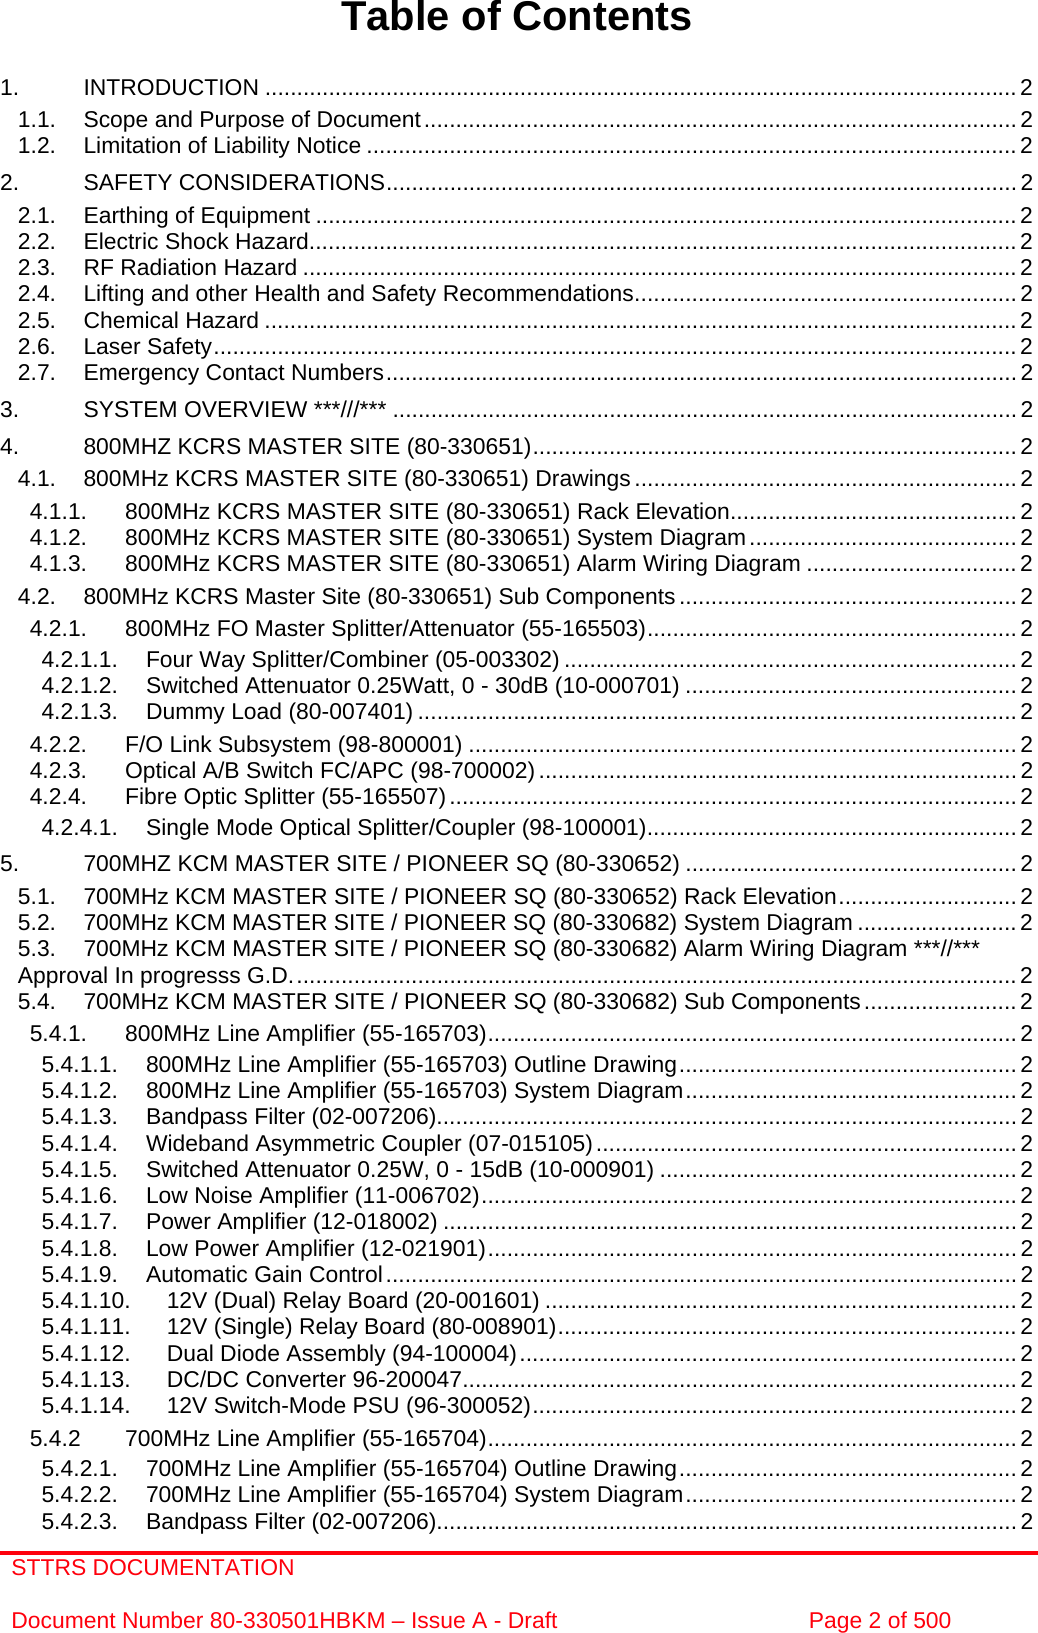 STTRS DOCUMENTATION  Document Number 80-330501HBKM – Issue A - Draft  Page 2 of 500     Table of Contents  1. INTRODUCTION ......................................................................................................................2 1.1. Scope and Purpose of Document.............................................................................................2 1.2. Limitation of Liability Notice ......................................................................................................2 2. SAFETY CONSIDERATIONS...................................................................................................2 2.1. Earthing of Equipment ..............................................................................................................2 2.2. Electric Shock Hazard...............................................................................................................2 2.3. RF Radiation Hazard ................................................................................................................2 2.4. Lifting and other Health and Safety Recommendations............................................................ 2 2.5. Chemical Hazard ......................................................................................................................2 2.6. Laser Safety..............................................................................................................................2 2.7. Emergency Contact Numbers...................................................................................................2 3. SYSTEM OVERVIEW ***///*** ..................................................................................................2 4. 800MHZ KCRS MASTER SITE (80-330651)............................................................................2 4.1. 800MHz KCRS MASTER SITE (80-330651) Drawings ............................................................ 2 4.1.1. 800MHz KCRS MASTER SITE (80-330651) Rack Elevation............................................. 2 4.1.2. 800MHz KCRS MASTER SITE (80-330651) System Diagram.......................................... 2 4.1.3. 800MHz KCRS MASTER SITE (80-330651) Alarm Wiring Diagram ................................. 2 4.2. 800MHz KCRS Master Site (80-330651) Sub Components.....................................................2 4.2.1. 800MHz FO Master Splitter/Attenuator (55-165503)..........................................................2 4.2.1.1. Four Way Splitter/Combiner (05-003302) .......................................................................2 4.2.1.2. Switched Attenuator 0.25Watt, 0 - 30dB (10-000701) .................................................... 2 4.2.1.3. Dummy Load (80-007401) ..............................................................................................2 4.2.2. F/O Link Subsystem (98-800001) ......................................................................................2 4.2.3. Optical A/B Switch FC/APC (98-700002) ........................................................................... 2 4.2.4. Fibre Optic Splitter (55-165507)......................................................................................... 2 4.2.4.1. Single Mode Optical Splitter/Coupler (98-100001).......................................................... 2 5. 700MHZ KCM MASTER SITE / PIONEER SQ (80-330652) .................................................... 2 5.1. 700MHz KCM MASTER SITE / PIONEER SQ (80-330652) Rack Elevation............................2 5.2. 700MHz KCM MASTER SITE / PIONEER SQ (80-330682) System Diagram ......................... 2 5.3. 700MHz KCM MASTER SITE / PIONEER SQ (80-330682) Alarm Wiring Diagram ***//*** Approval In progresss G.D..................................................................................................................2 5.4. 700MHz KCM MASTER SITE / PIONEER SQ (80-330682) Sub Components........................ 2 5.4.1. 800MHz Line Amplifier (55-165703)...................................................................................2 5.4.1.1. 800MHz Line Amplifier (55-165703) Outline Drawing.....................................................2 5.4.1.2. 800MHz Line Amplifier (55-165703) System Diagram.................................................... 2 5.4.1.3. Bandpass Filter (02-007206)...........................................................................................2 5.4.1.4. Wideband Asymmetric Coupler (07-015105).................................................................. 2 5.4.1.5. Switched Attenuator 0.25W, 0 - 15dB (10-000901) ........................................................ 2 5.4.1.6. Low Noise Amplifier (11-006702).................................................................................... 2 5.4.1.7. Power Amplifier (12-018002) .......................................................................................... 2 5.4.1.8. Low Power Amplifier (12-021901)...................................................................................2 5.4.1.9. Automatic Gain Control...................................................................................................2 5.4.1.10. 12V (Dual) Relay Board (20-001601) ..........................................................................2 5.4.1.11. 12V (Single) Relay Board (80-008901)........................................................................ 2 5.4.1.12. Dual Diode Assembly (94-100004)..............................................................................2 5.4.1.13. DC/DC Converter 96-200047....................................................................................... 2 5.4.1.14. 12V Switch-Mode PSU (96-300052)............................................................................ 2 5.4.2 700MHz Line Amplifier (55-165704)...................................................................................2 5.4.2.1. 700MHz Line Amplifier (55-165704) Outline Drawing.....................................................2 5.4.2.2. 700MHz Line Amplifier (55-165704) System Diagram.................................................... 2 5.4.2.3. Bandpass Filter (02-007206)...........................................................................................2 